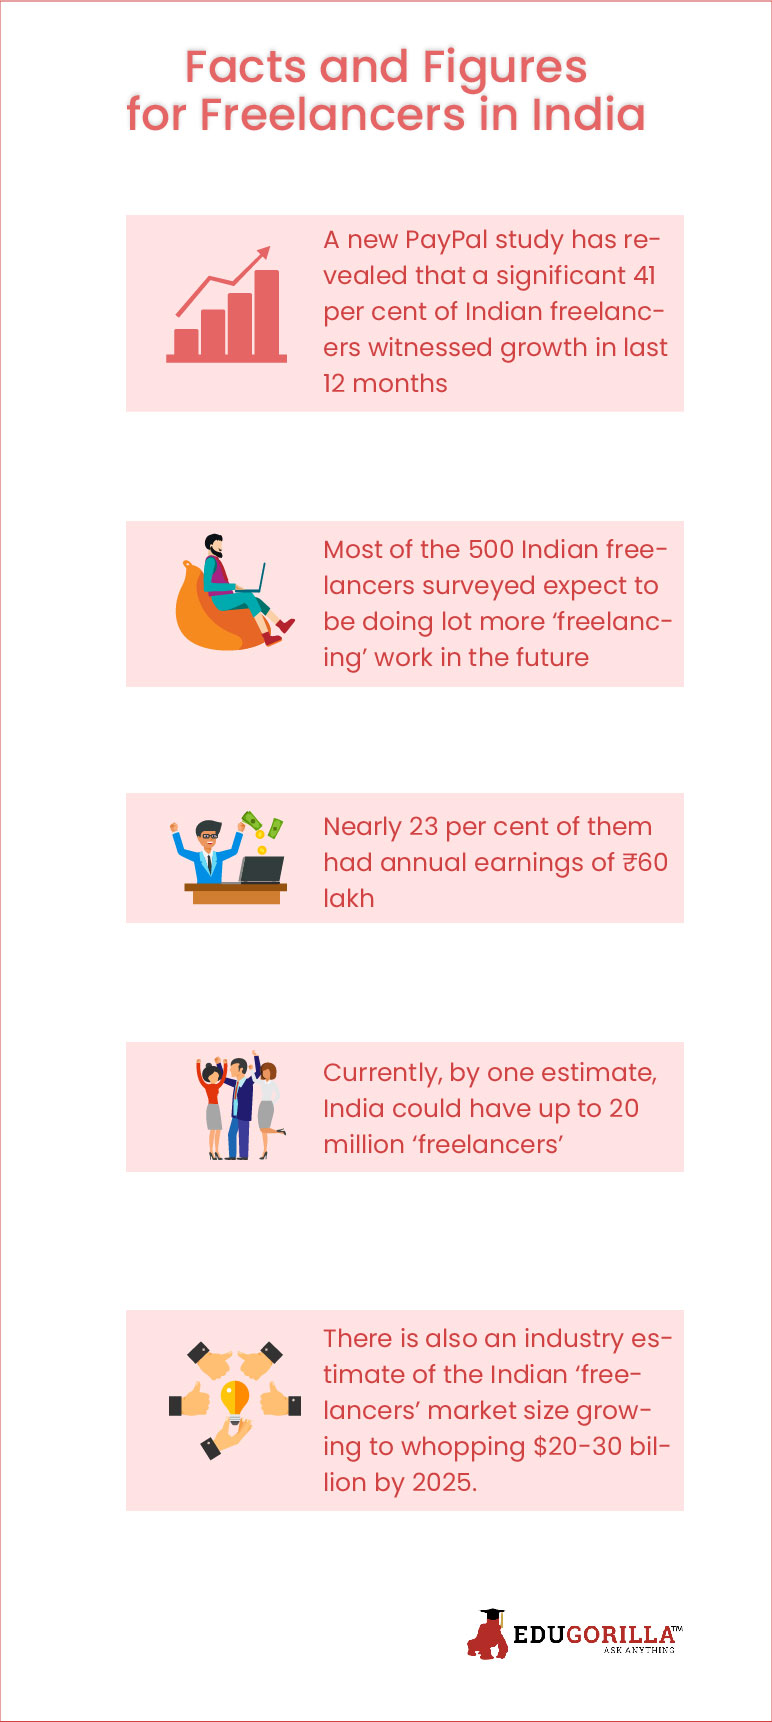 Facts and Figures for Freelancers in India